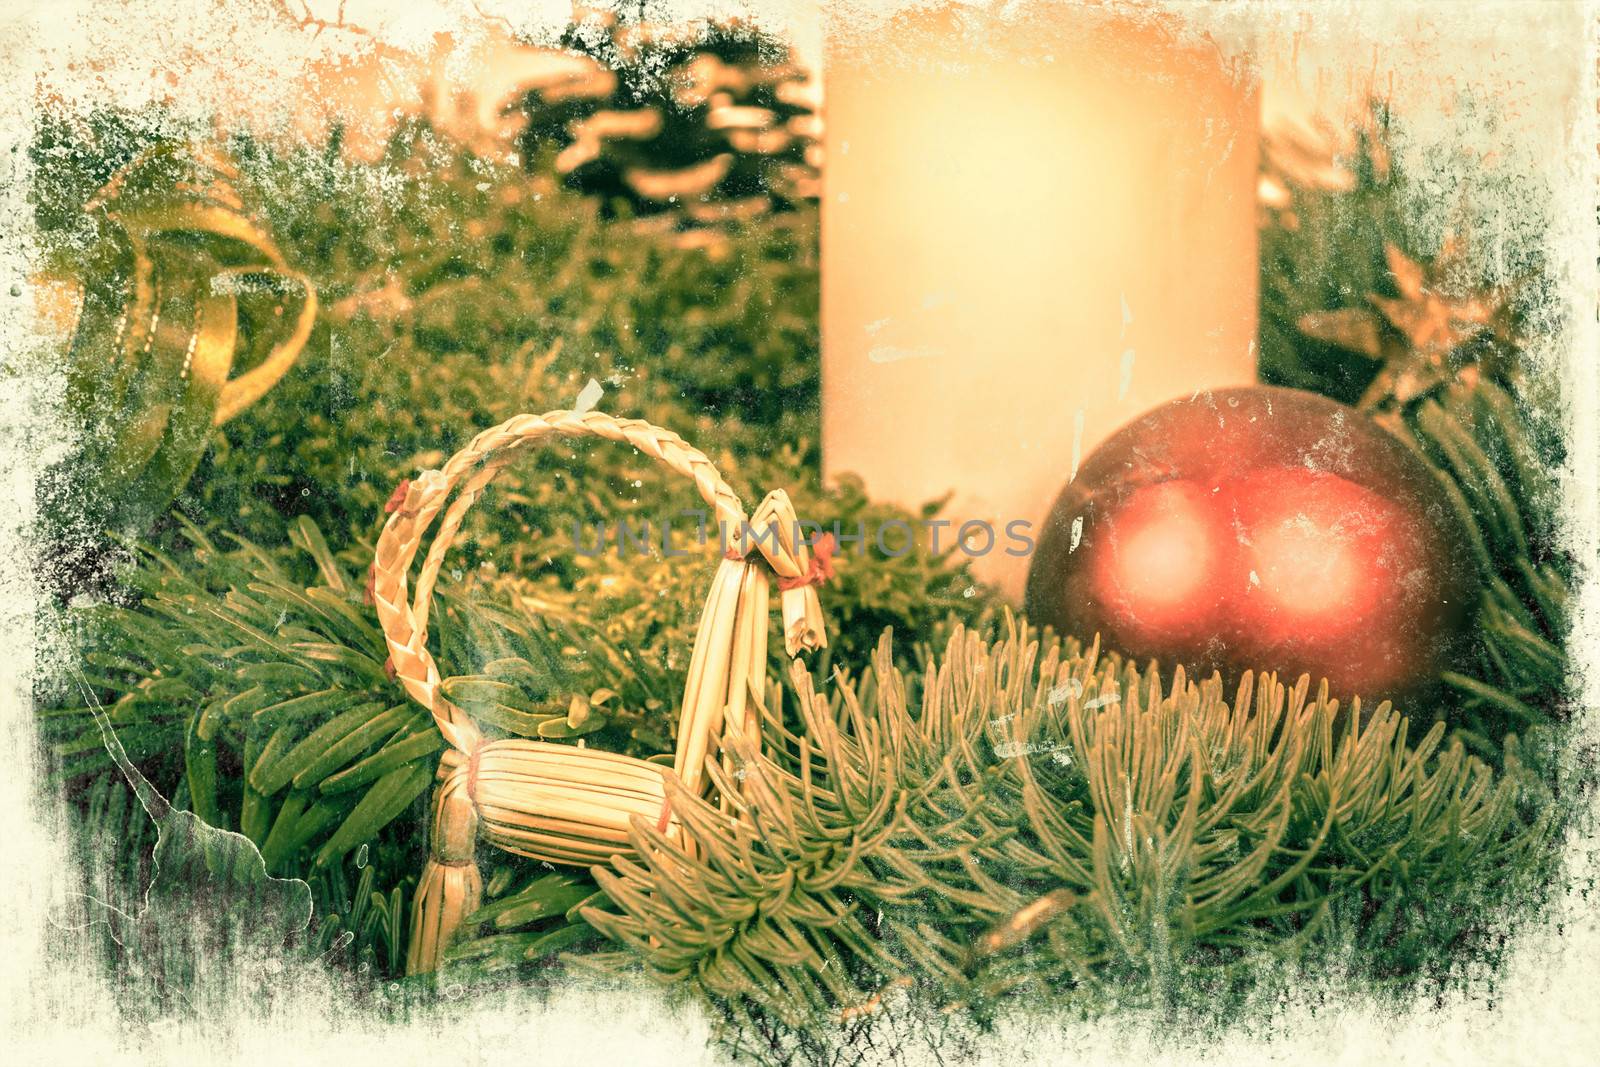 Christmas decoration by Sportactive